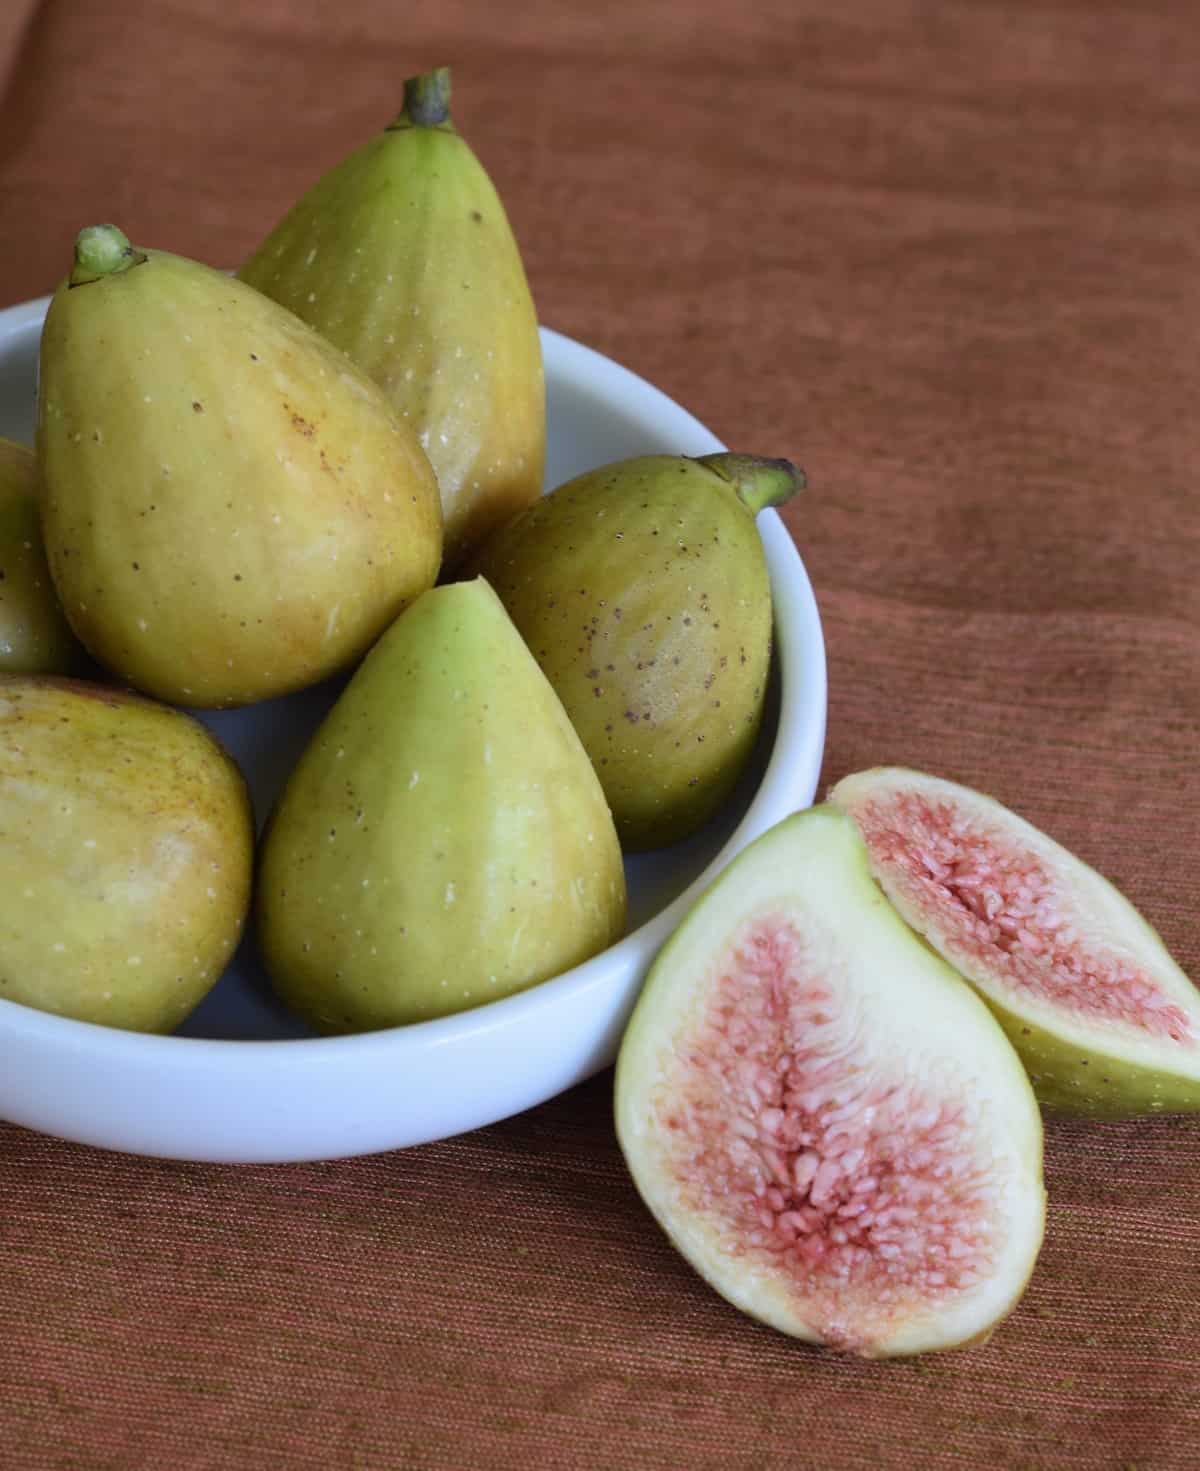 White bowl of green figs with one cut in half on wooden surface.